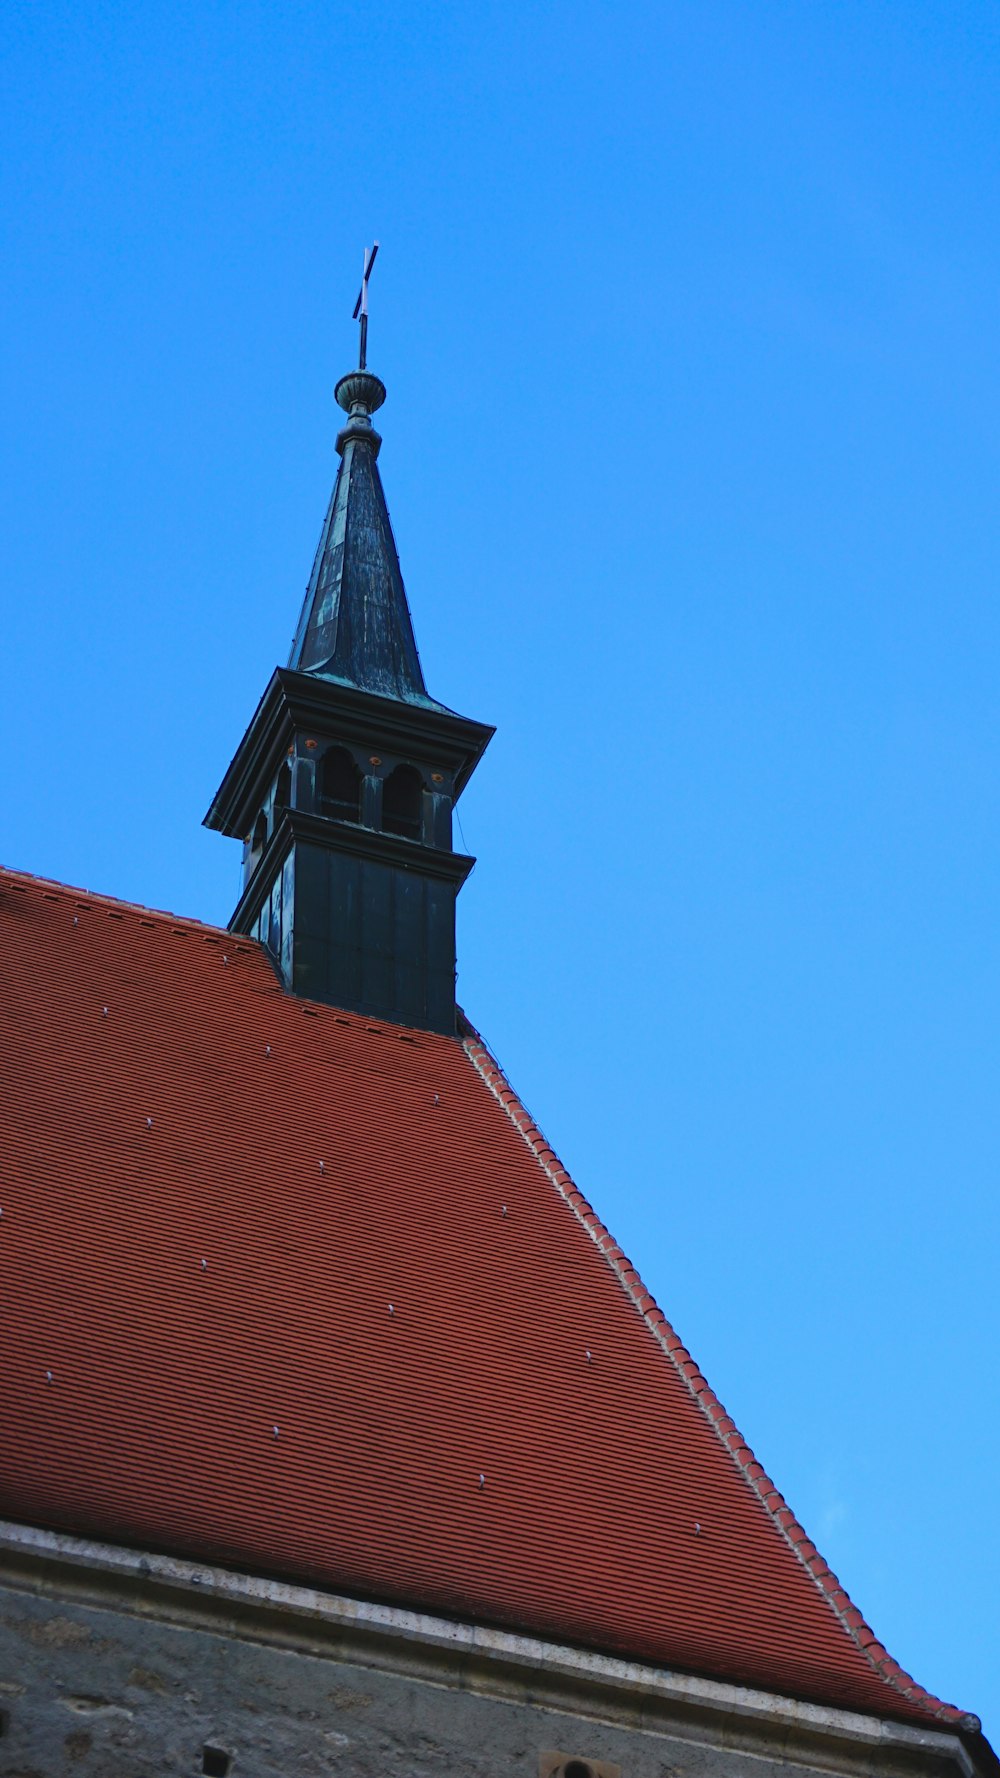 a building with a steeple and a clock on it